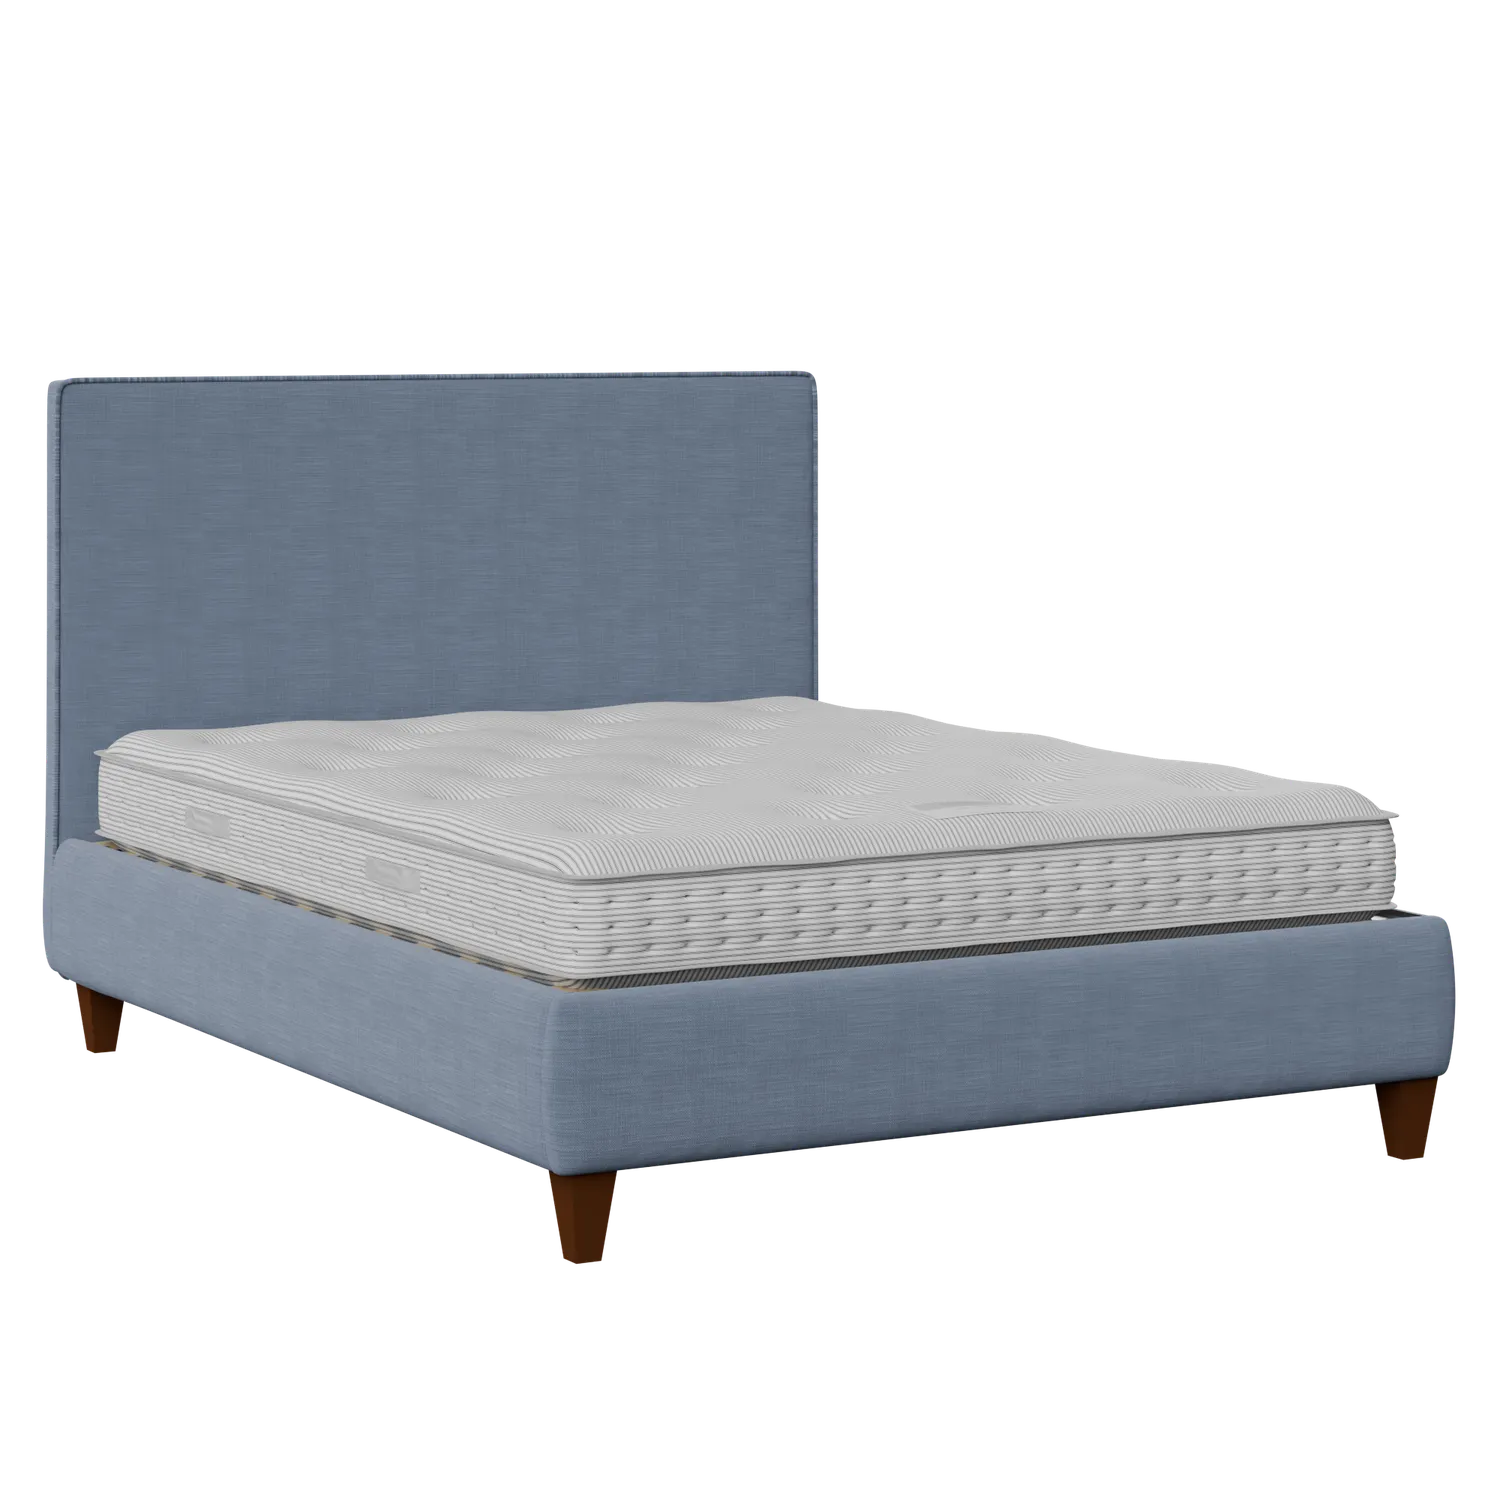 Yushan with Piping stoffen bed in blauw